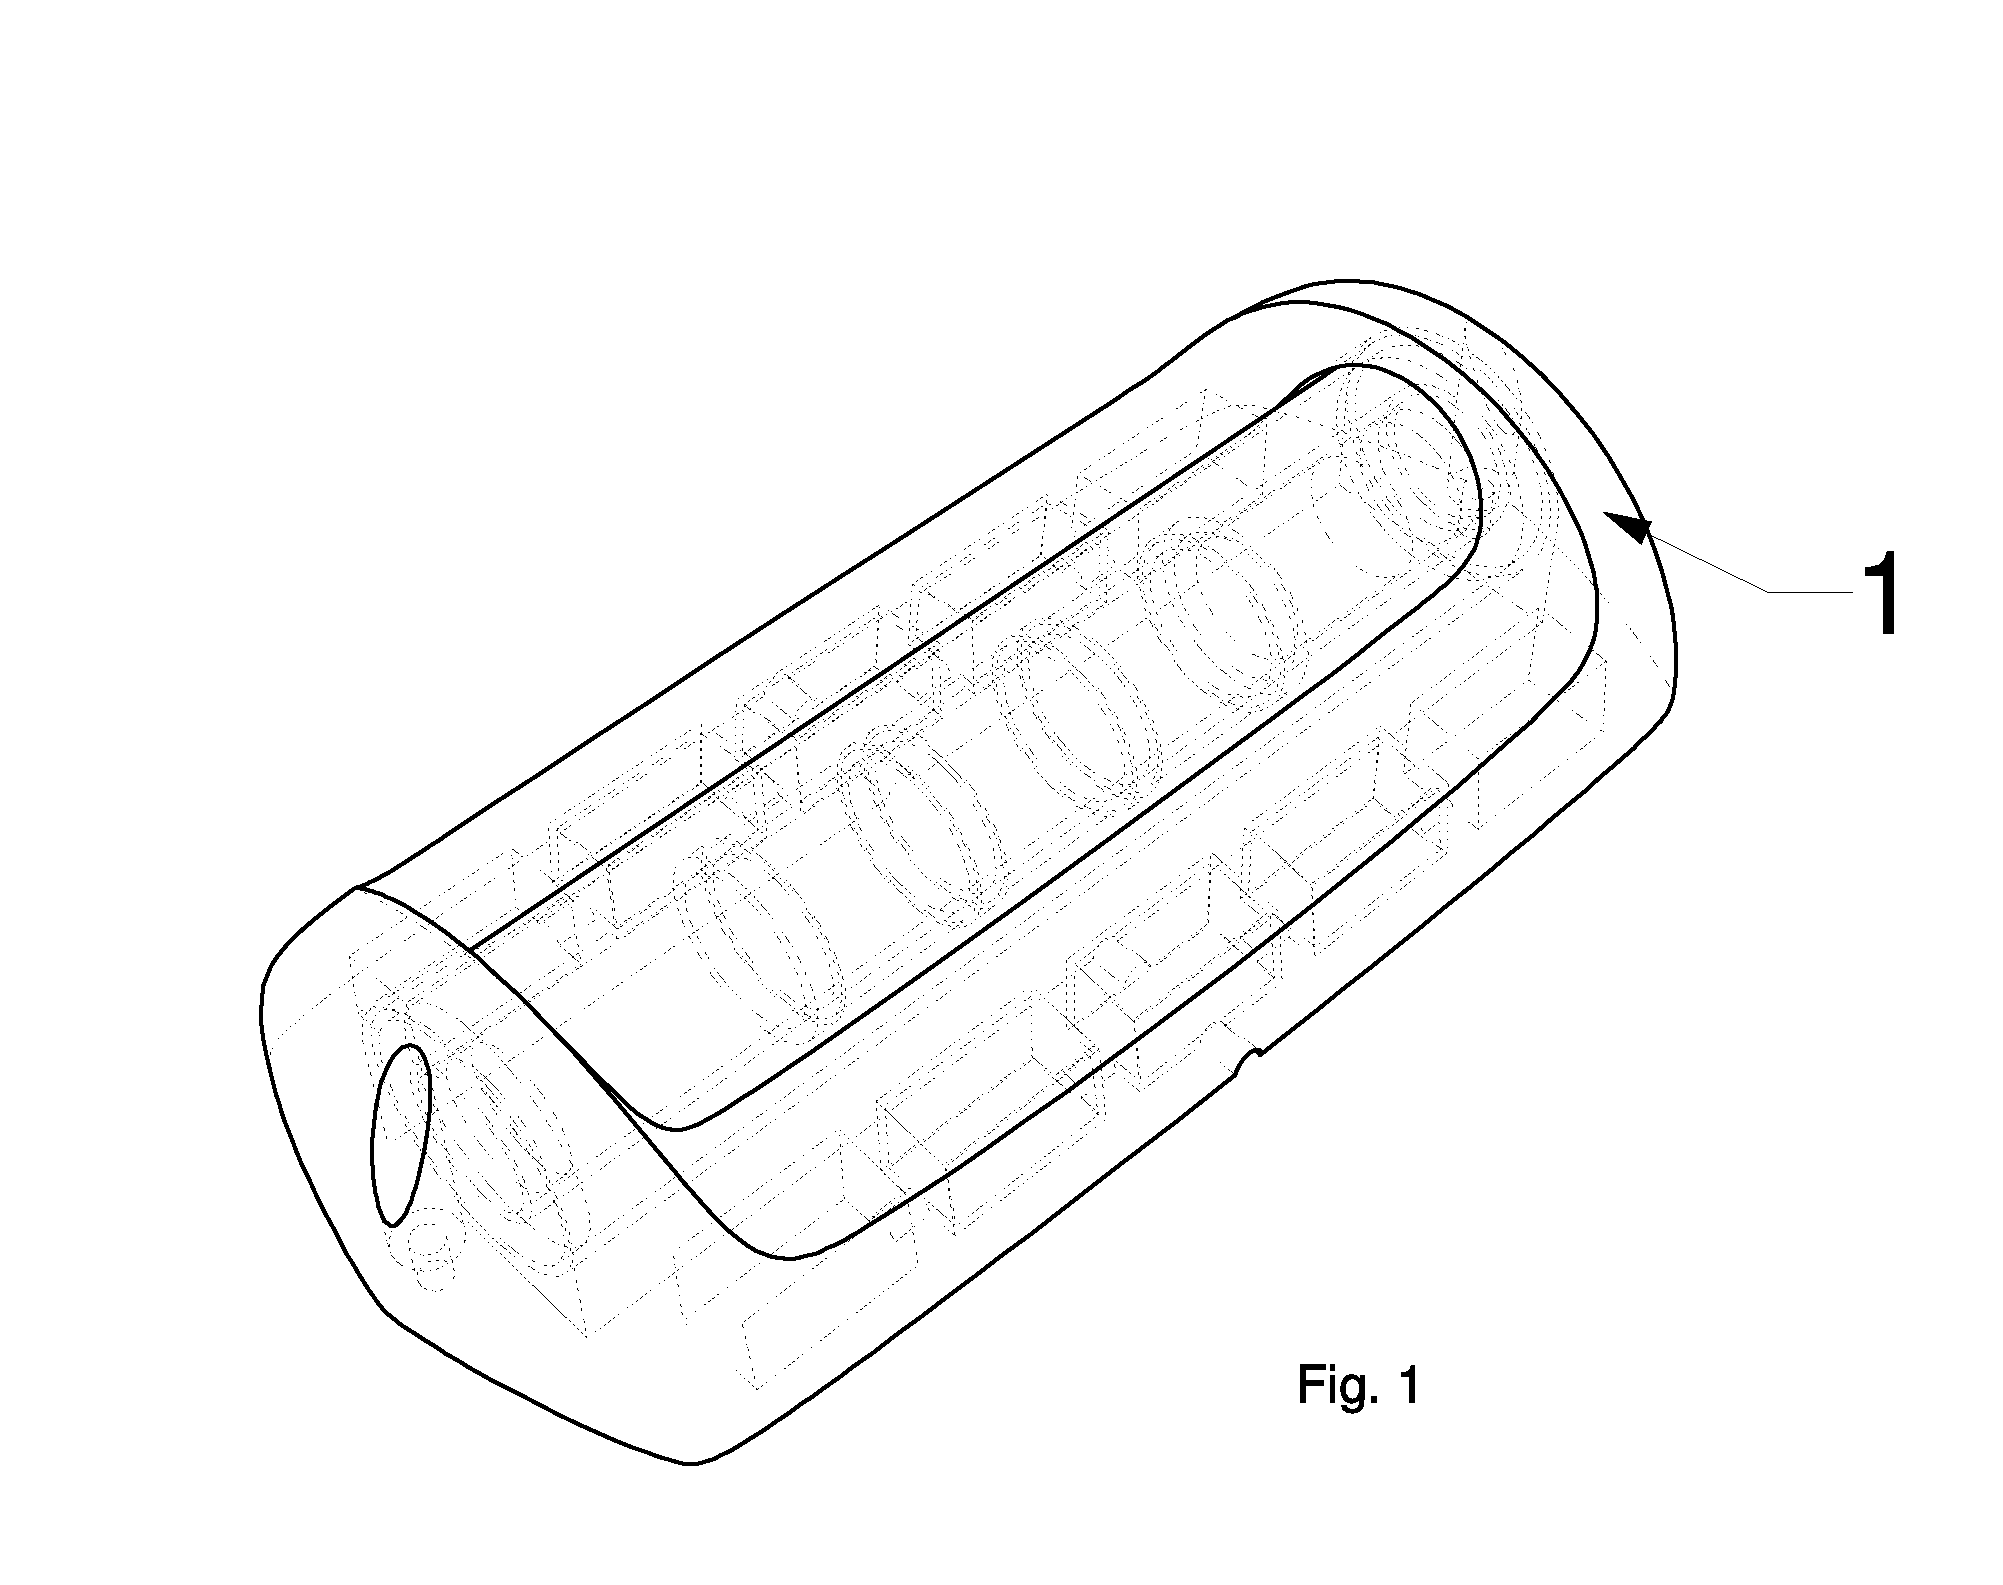 Device for powering interactive appliances in moving playground equipment